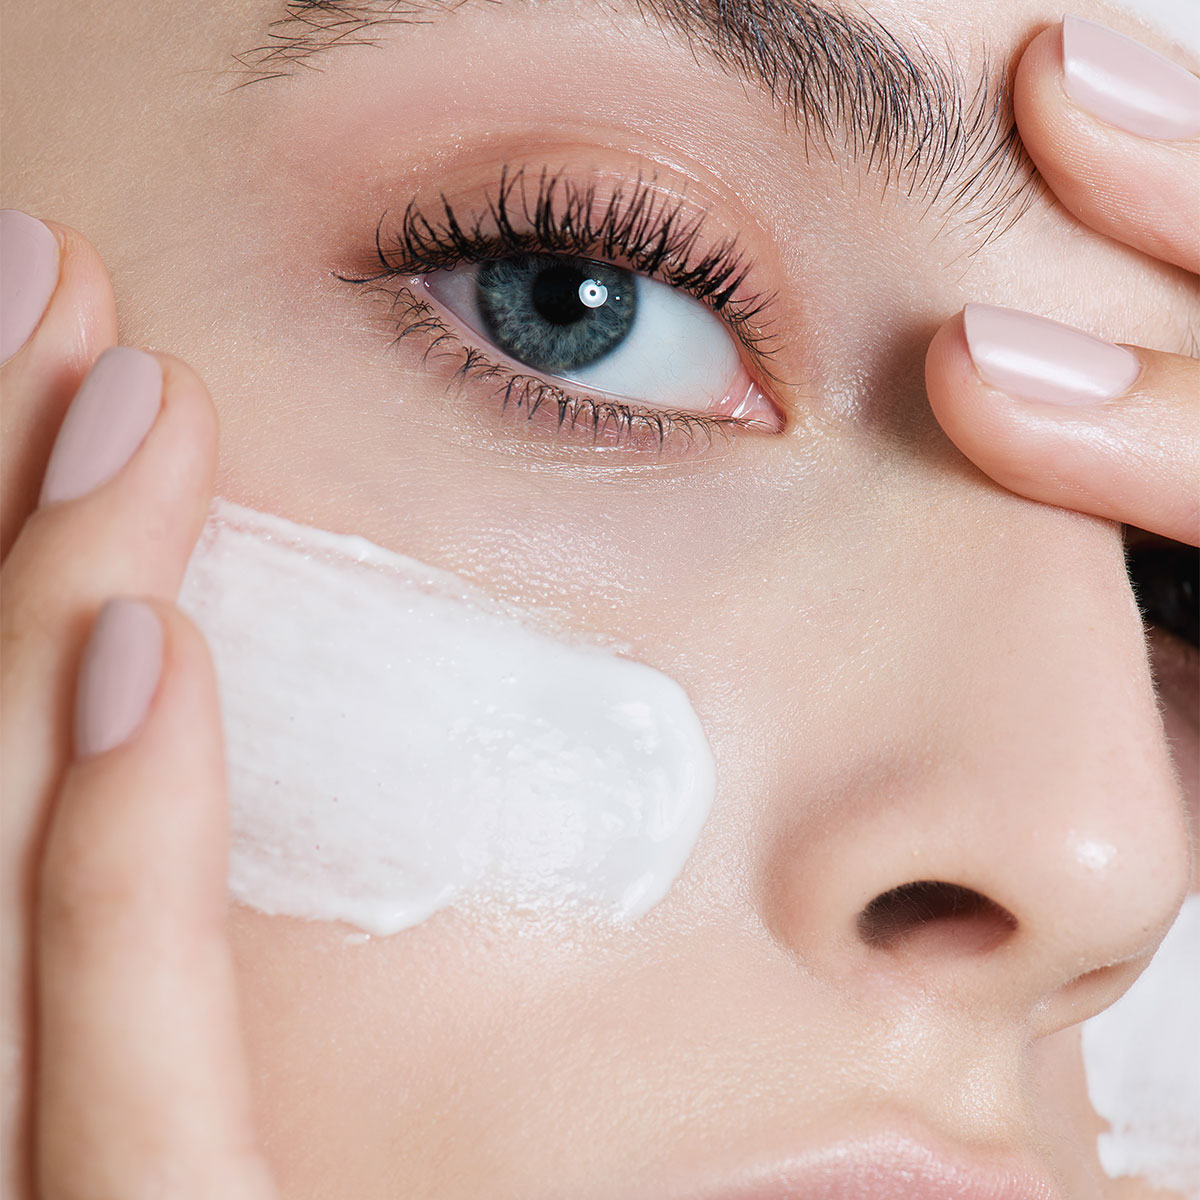 woman applying white sunscreen under-eye middle of face